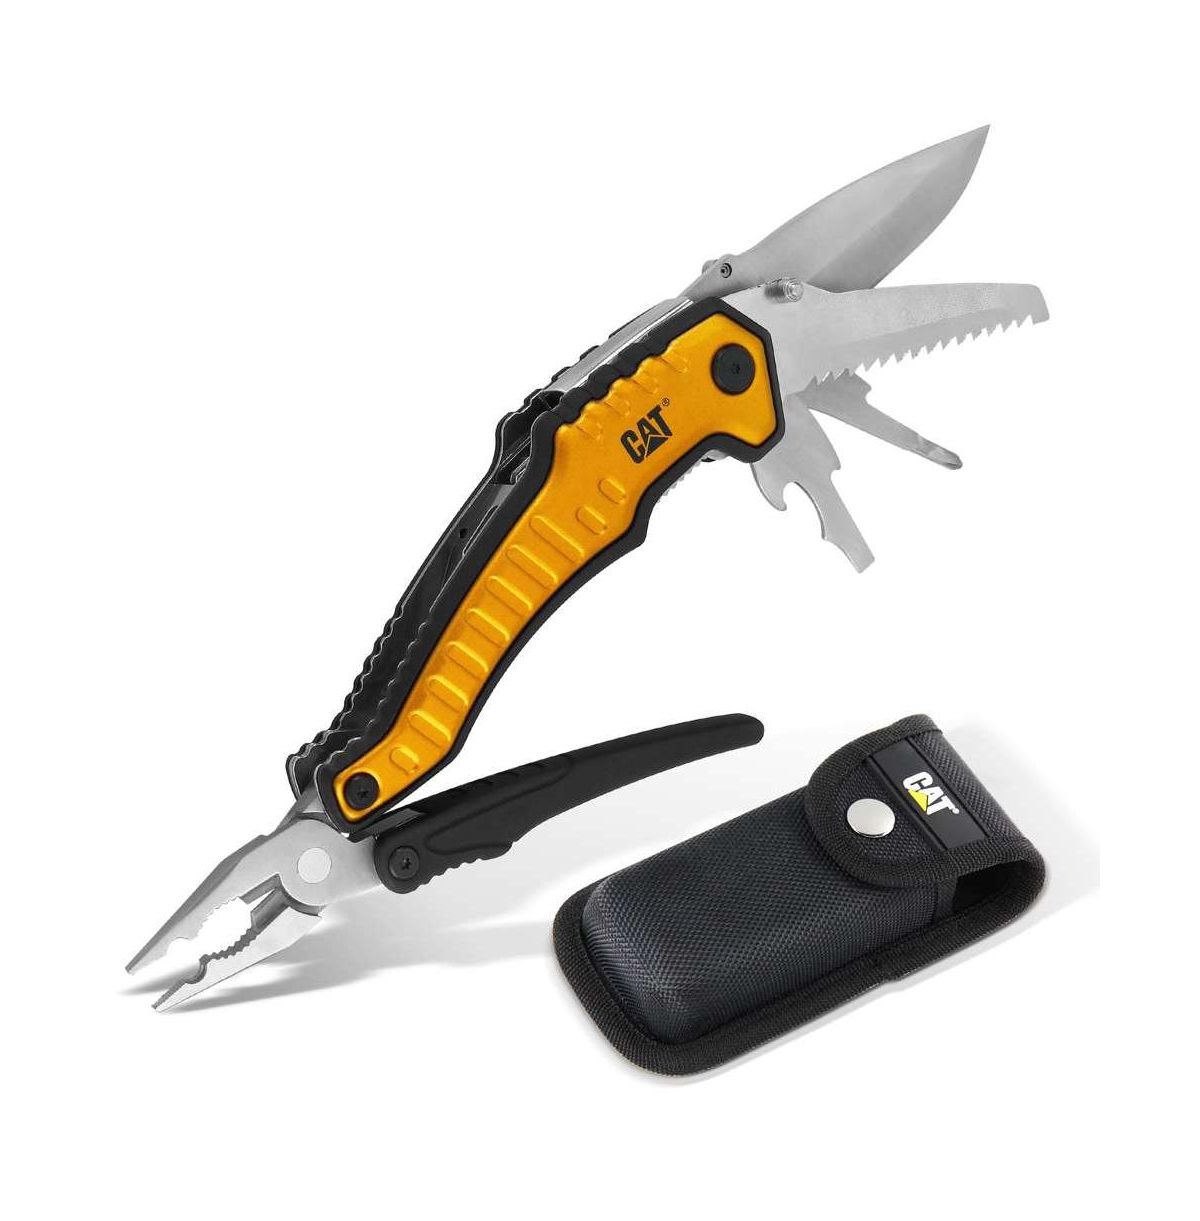 15647521 Xl 9-in-1 Multifunction Knife and Pliers Tool with sku 15647521